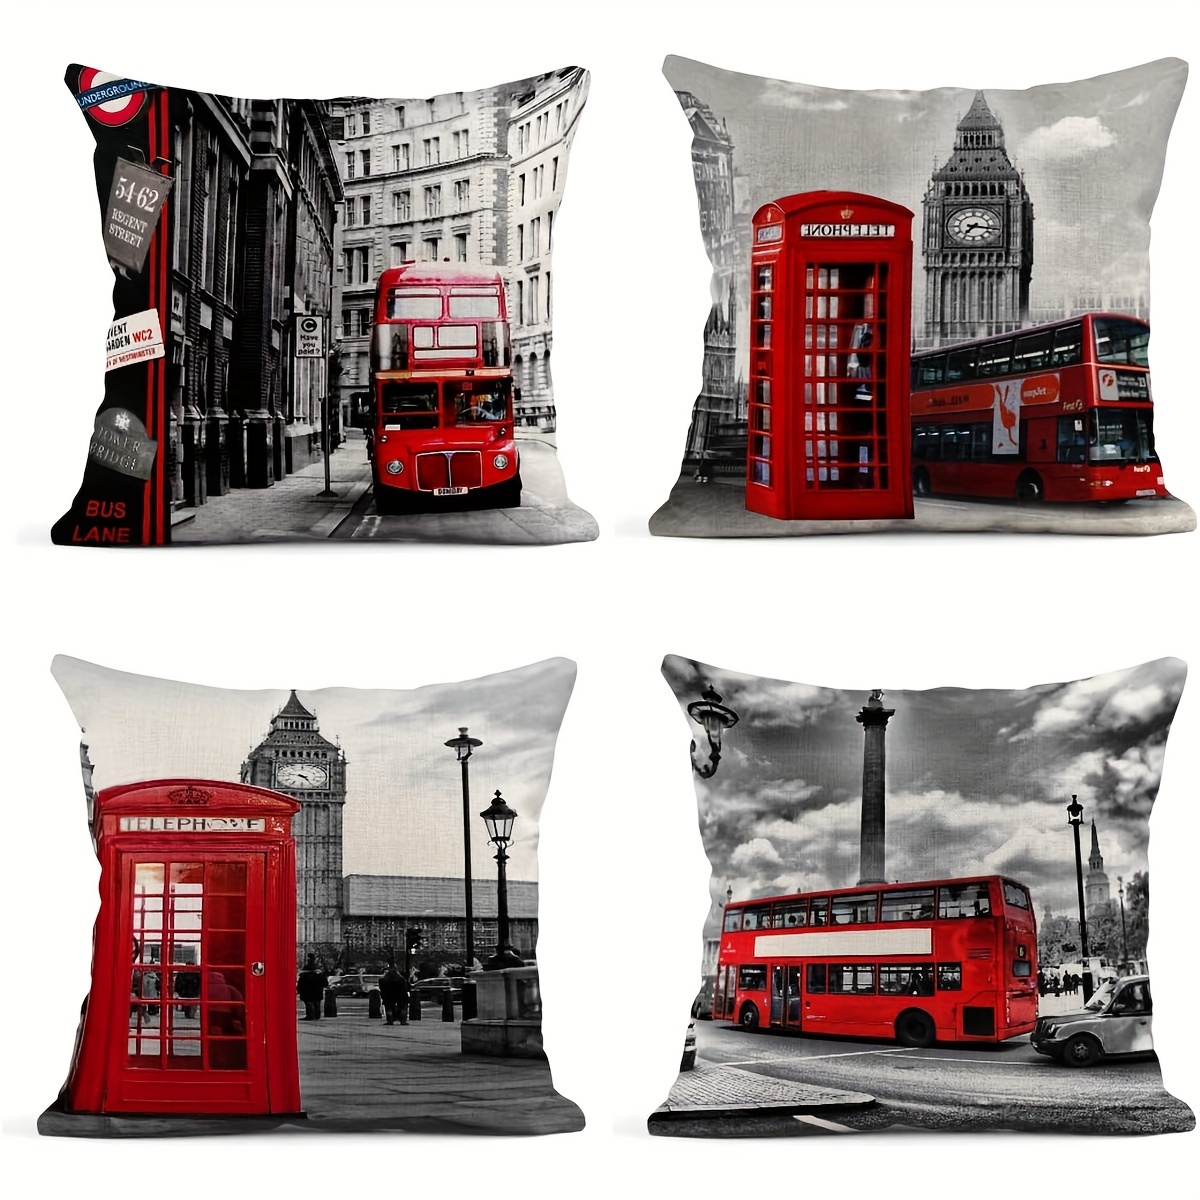 

4pcs Linen Throw Pillow Covers 18x18 Inches Home Decorative Cushion Red London Street Bus Telephone Booth Big Ben Pillow Cases Square Pillocases For Bed Sofa(no Pillow Insert)